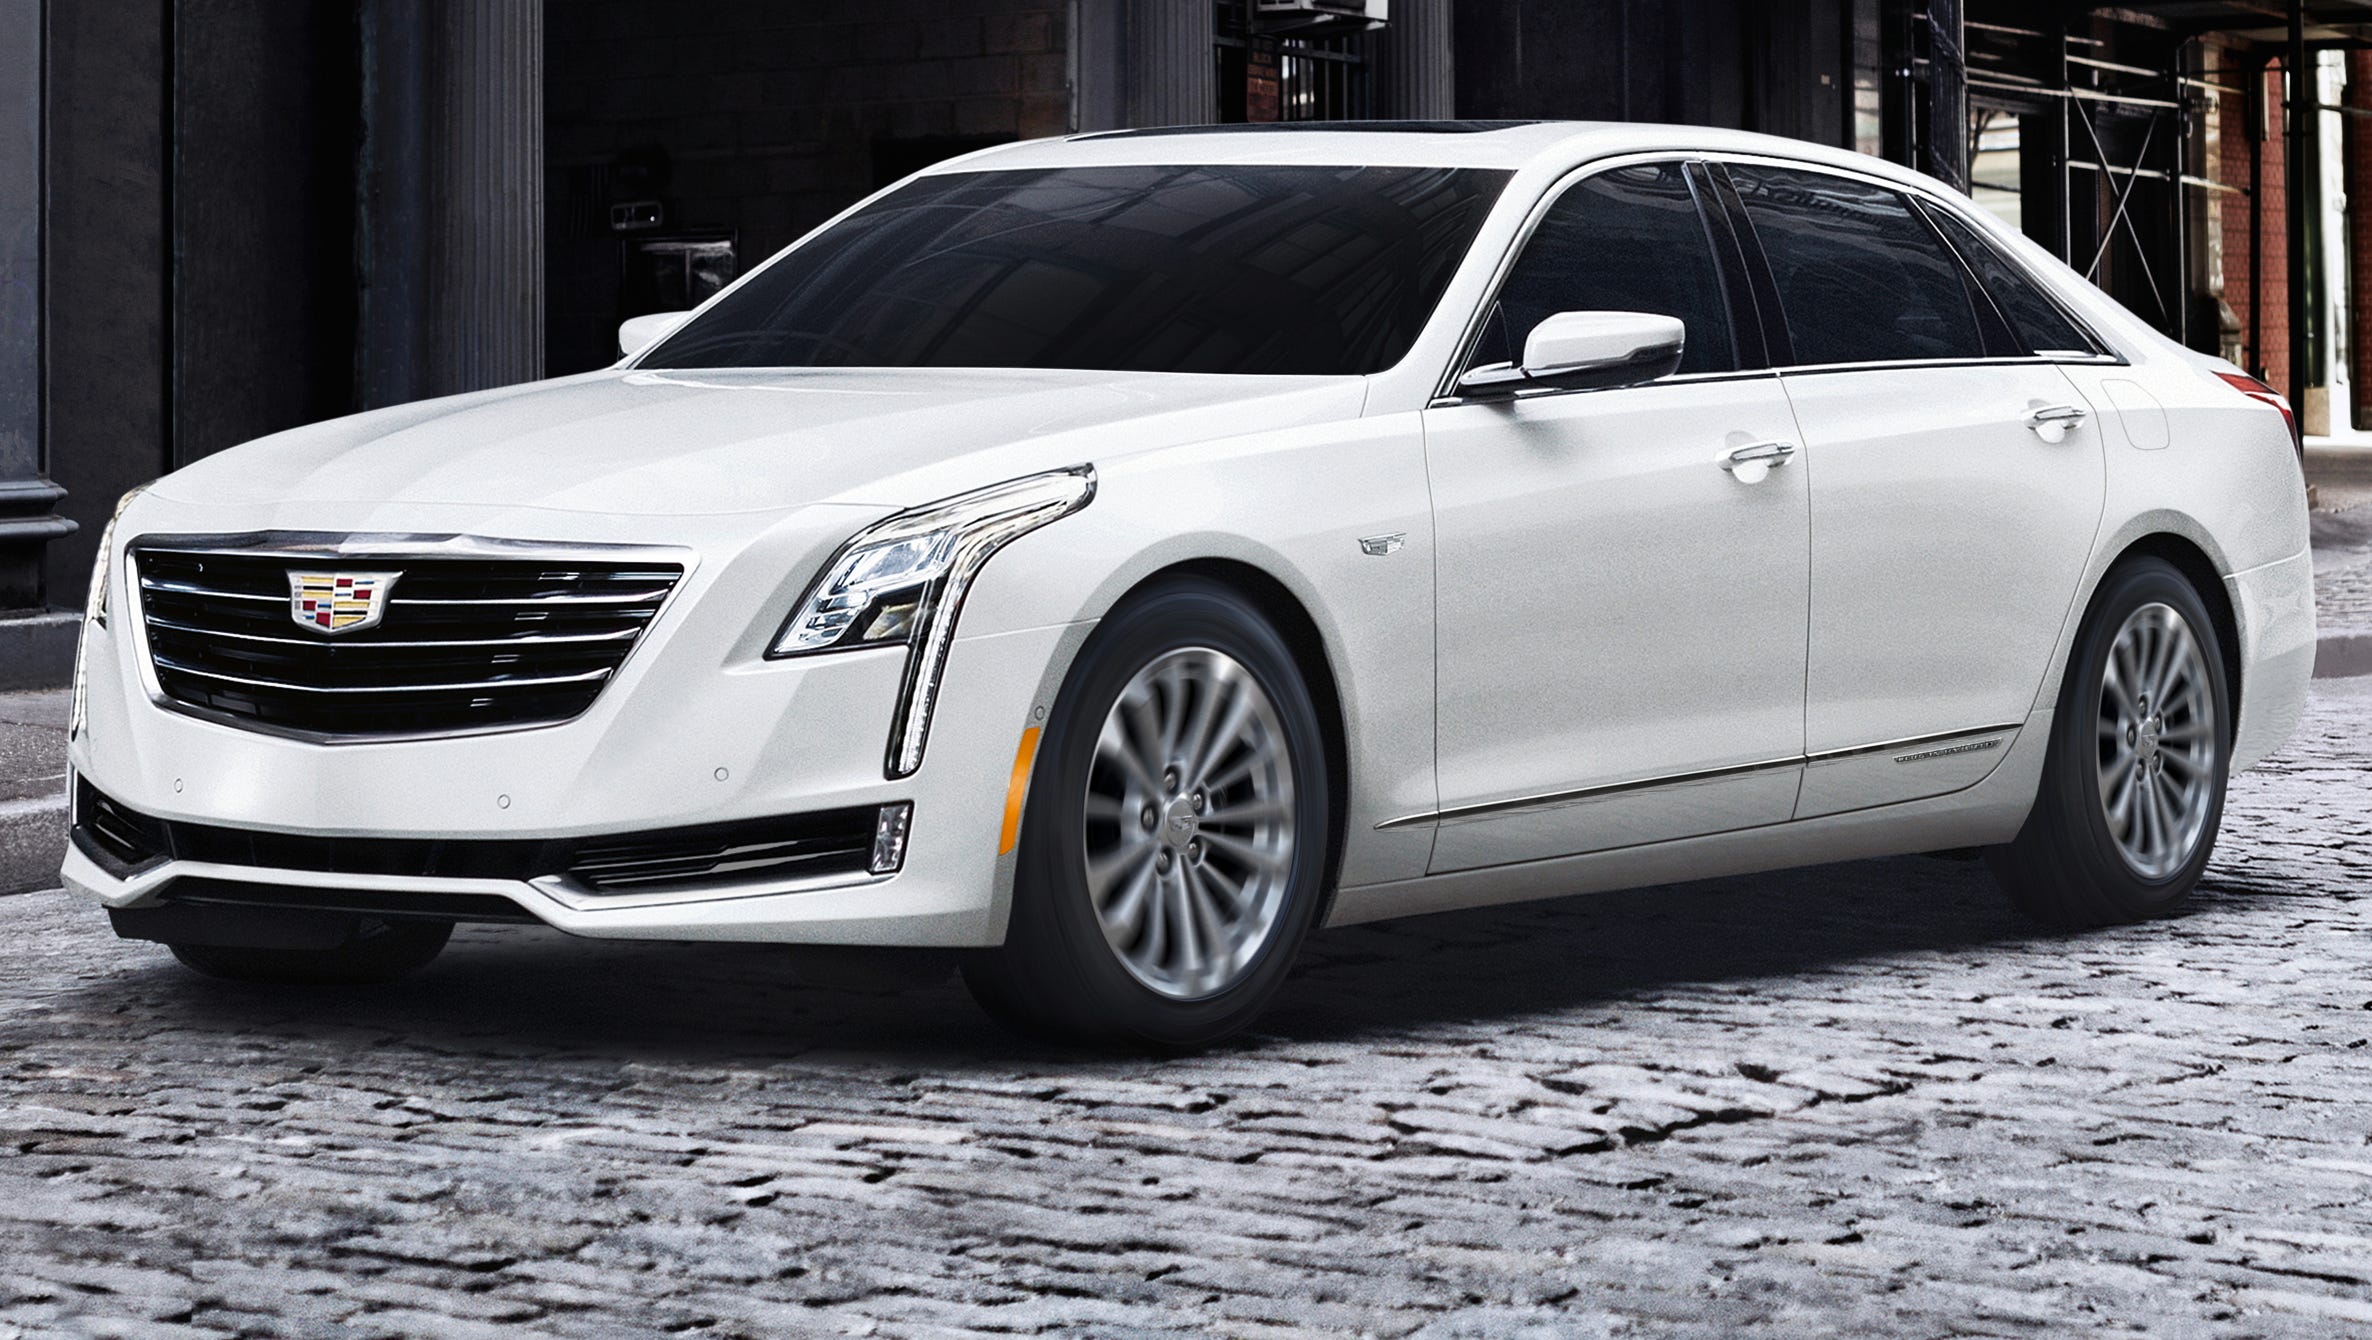 Review: Cadillac CT6 plug-in is a quiet champ